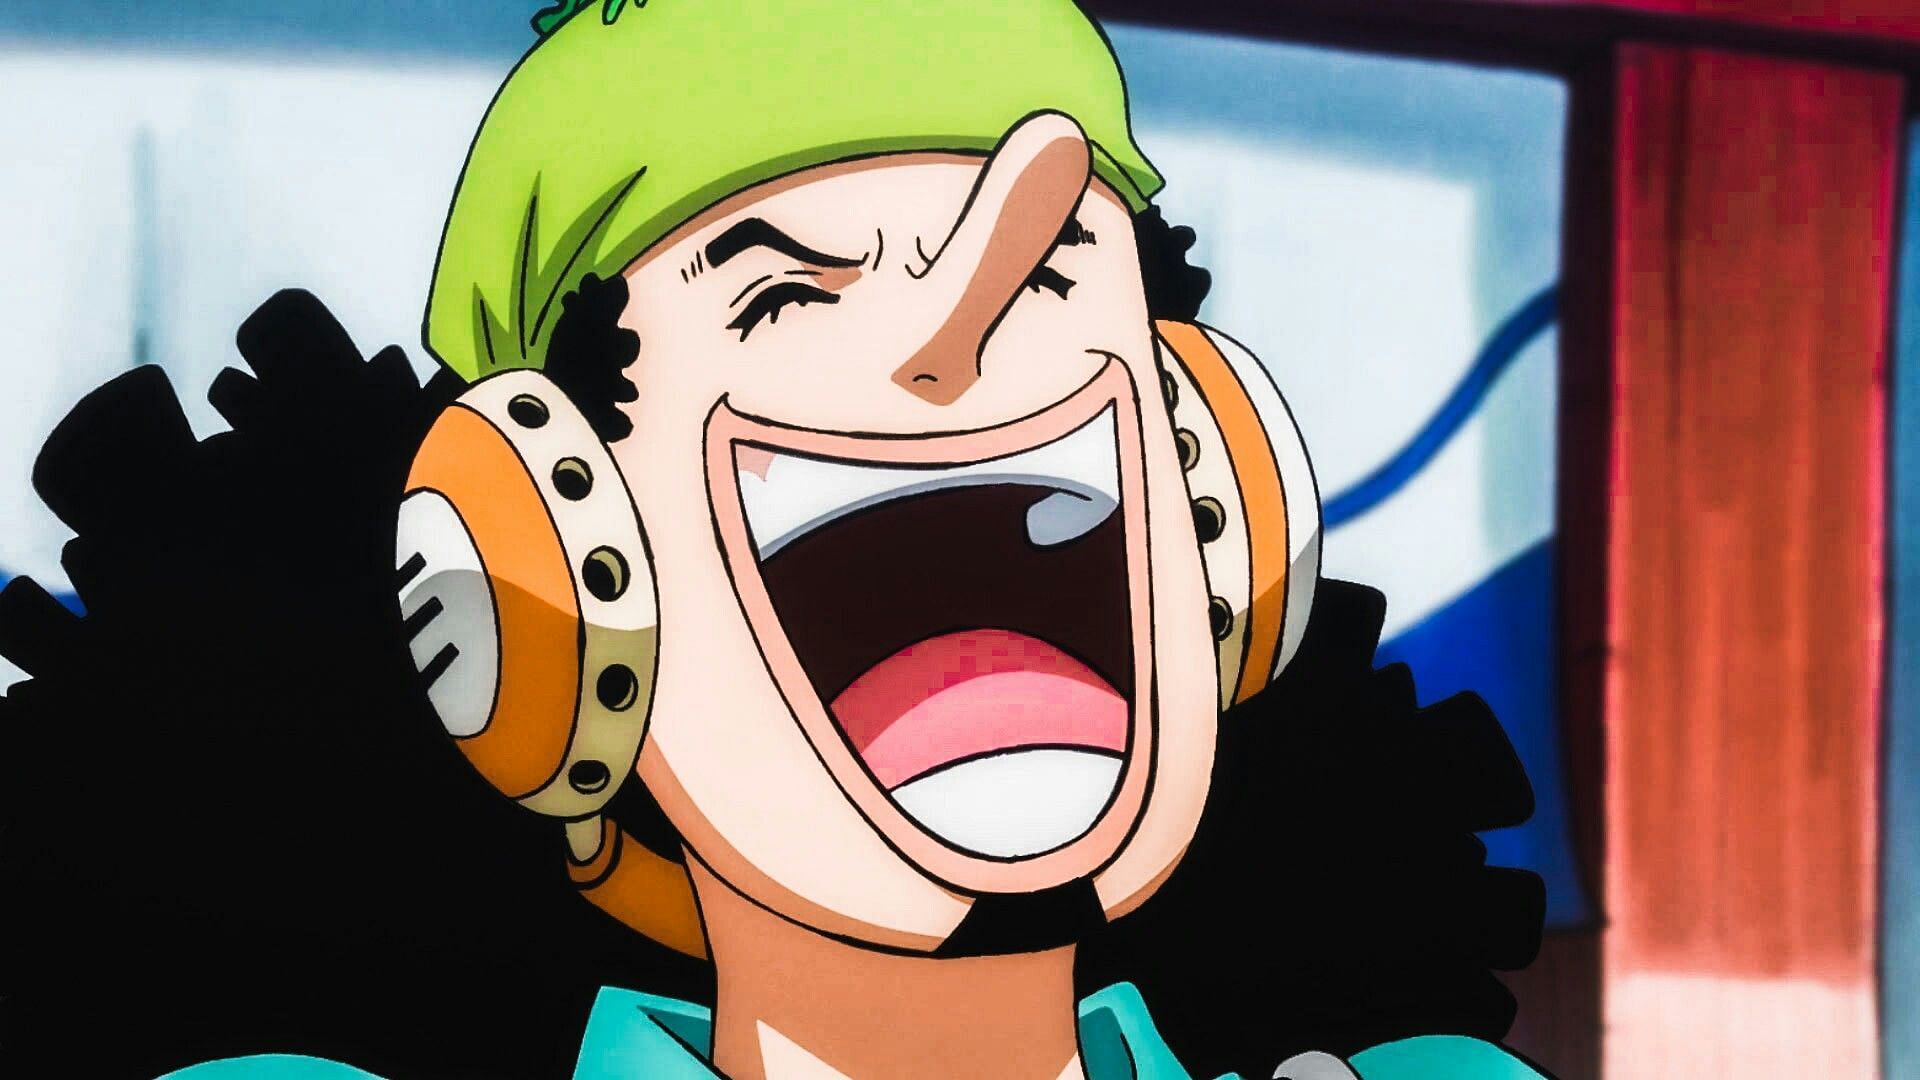 Usopp as shown in One Piece anime (Image via Toei Animation)